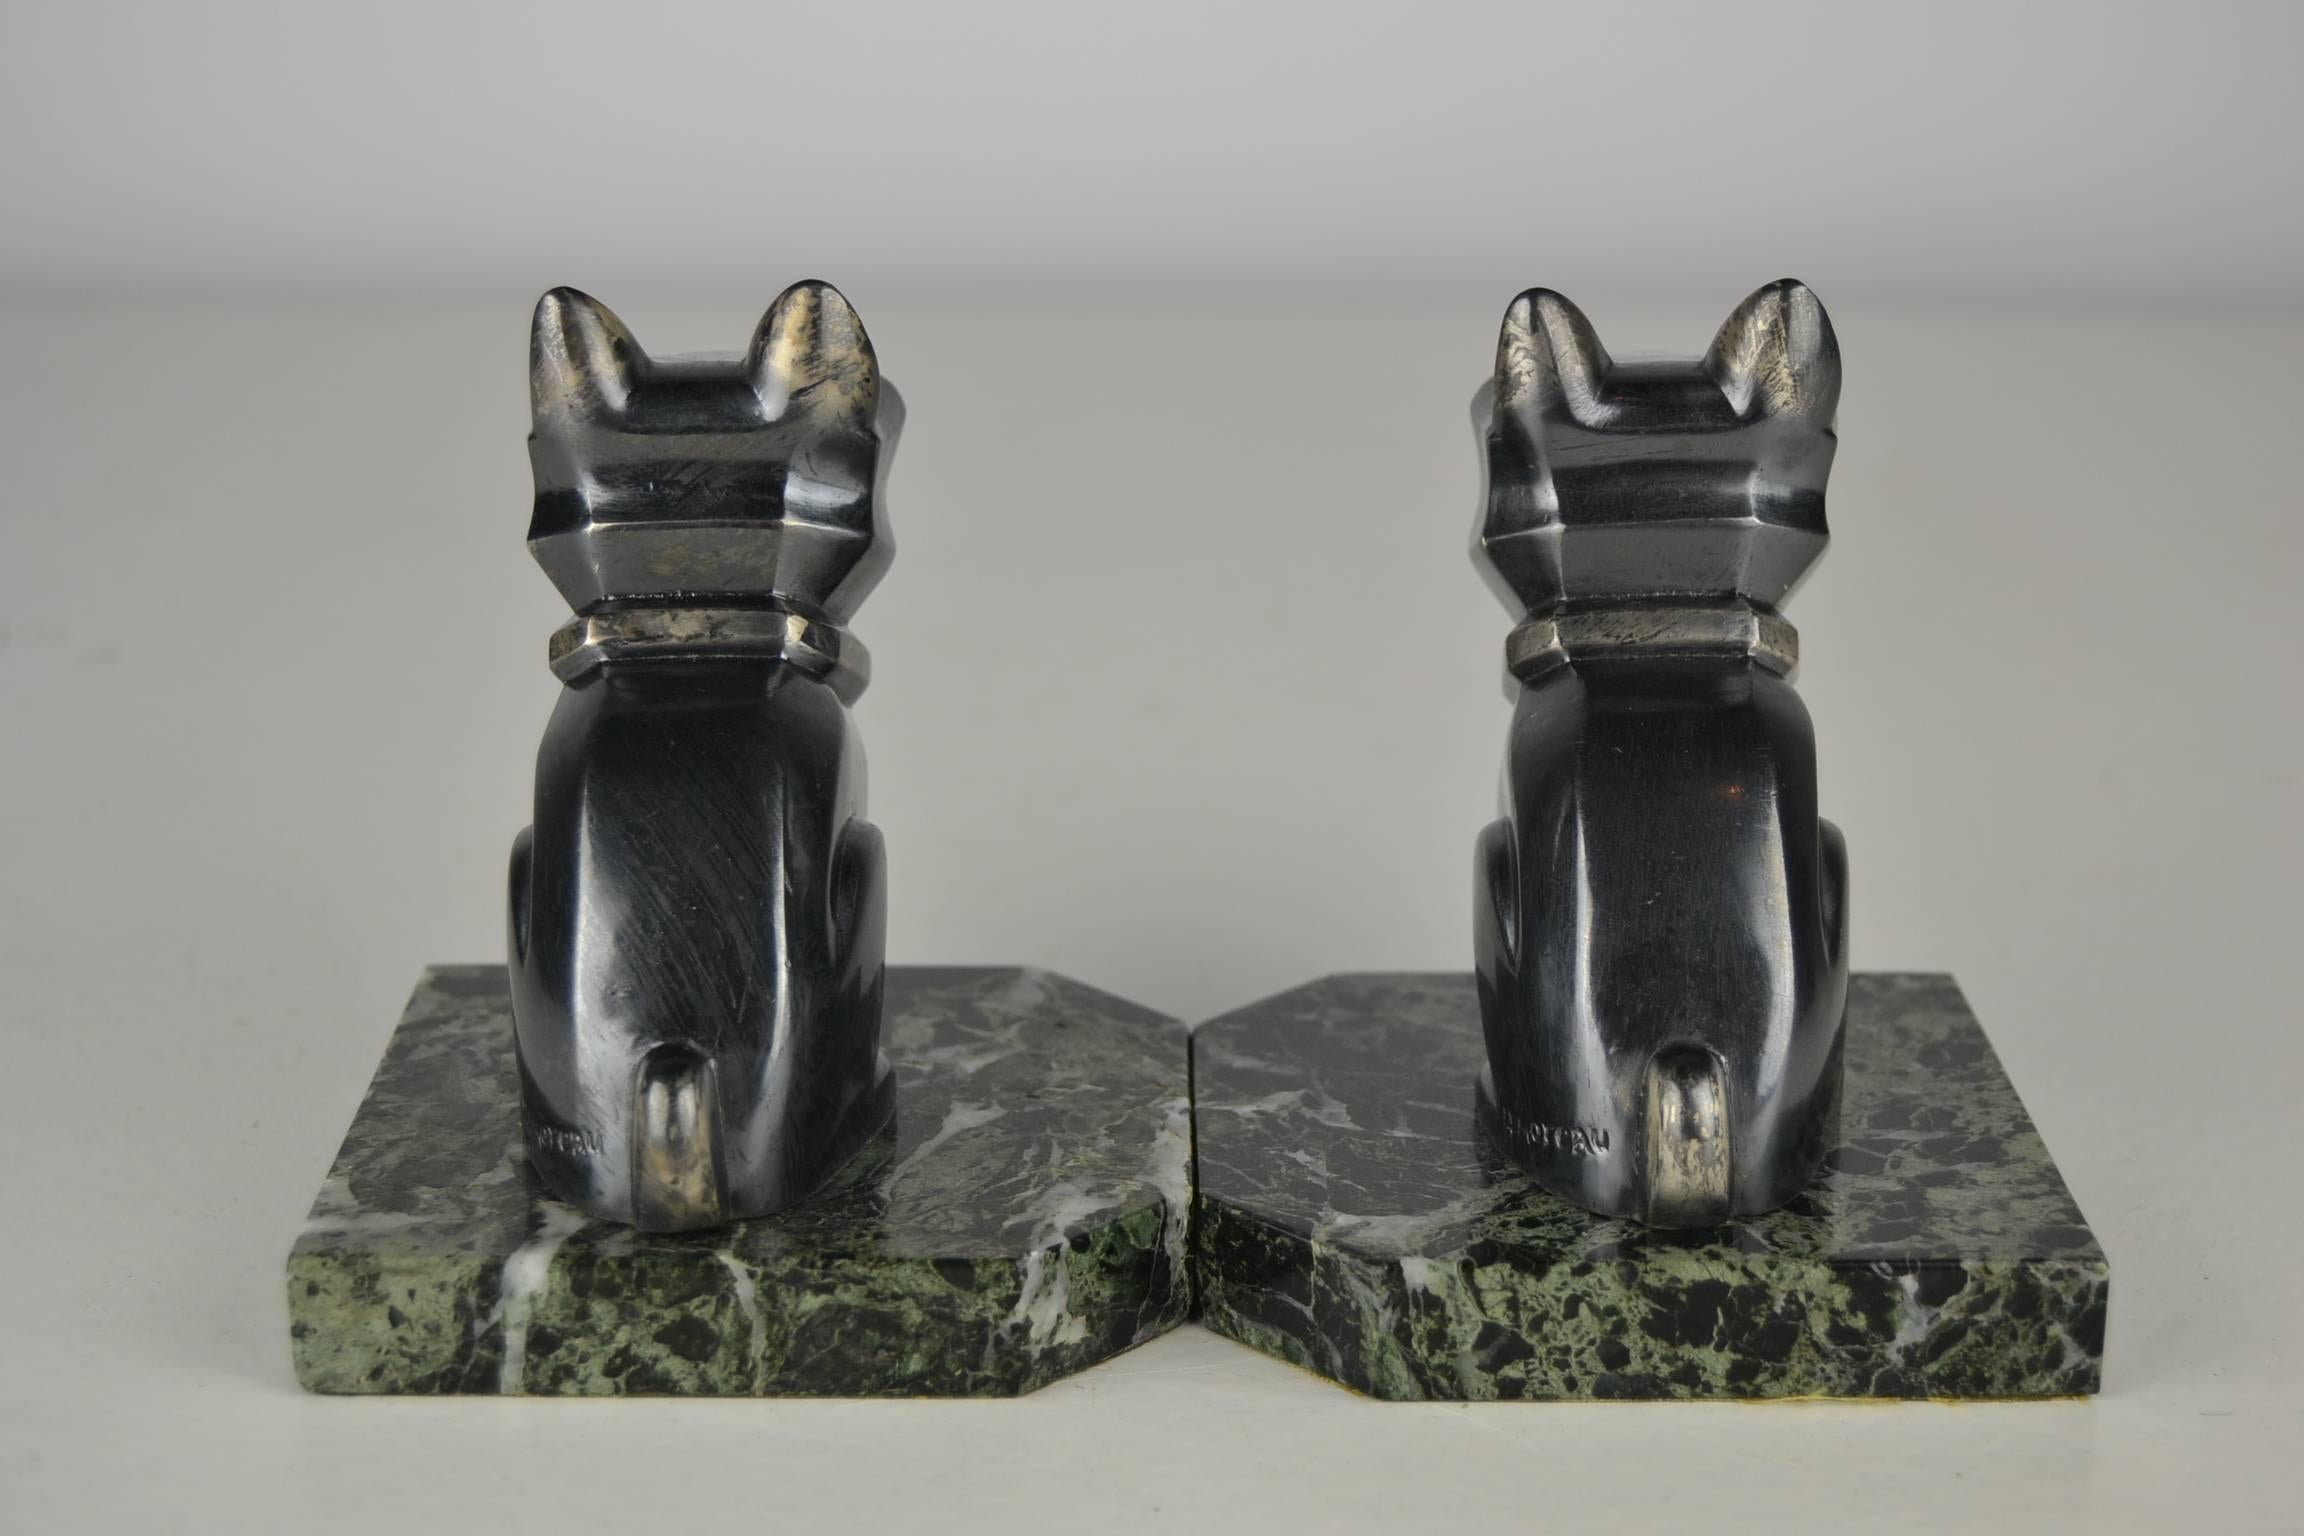 20th Century Vintage Pair of French Art Deco Bookends, Bulldogs, by H.Moreau, circa 1930s